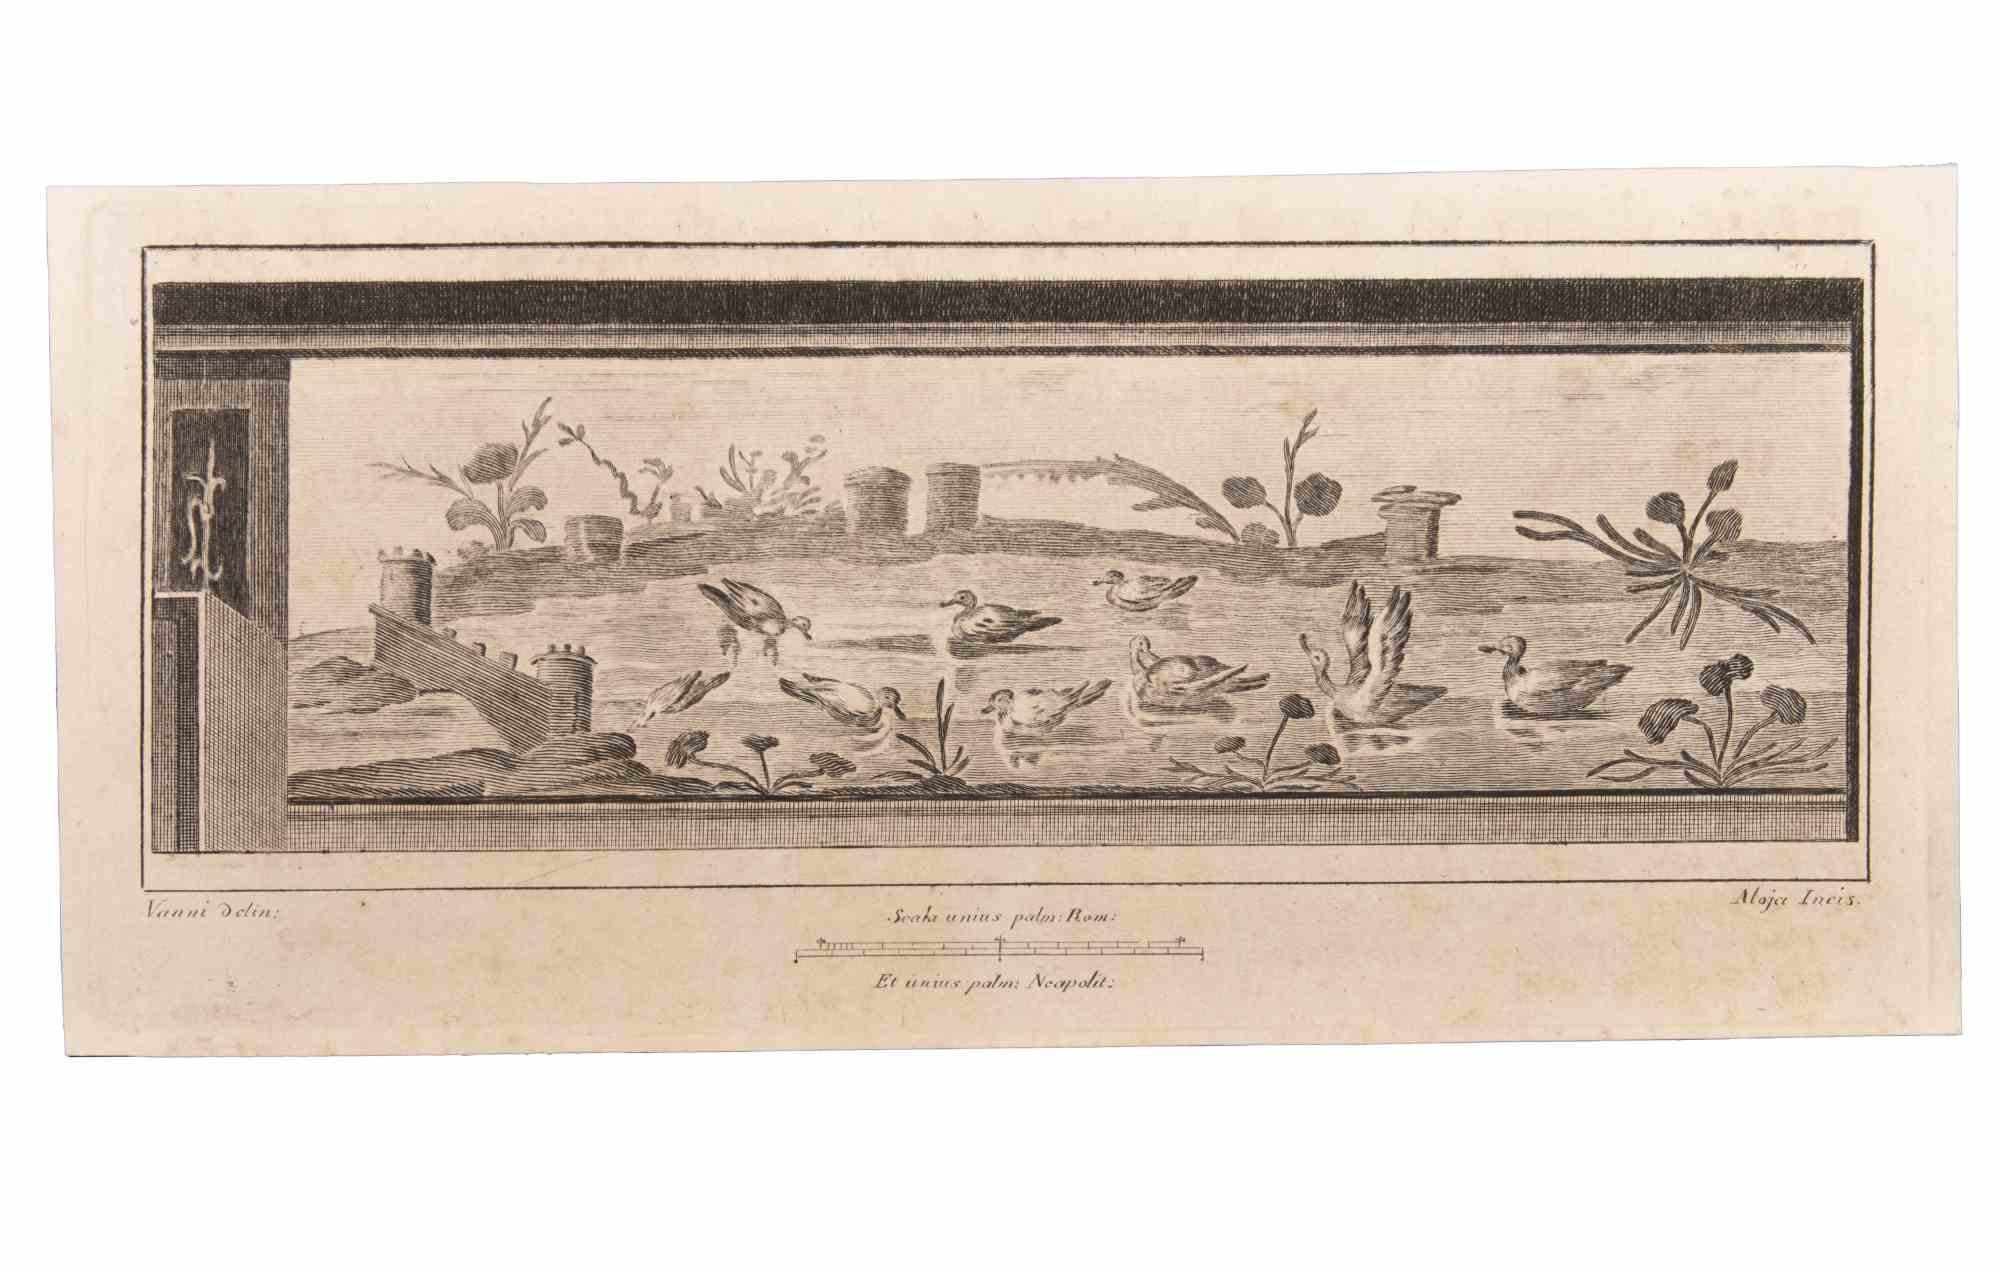 Landscape With Animals is an Etching realized by  Luigi Aloja (1783-1837).

The etching belongs to the print suite “Antiquities of Herculaneum Exposed” (original title: “Le Antichità di Ercolano Esposte”), an eight-volume volume of engravings of the